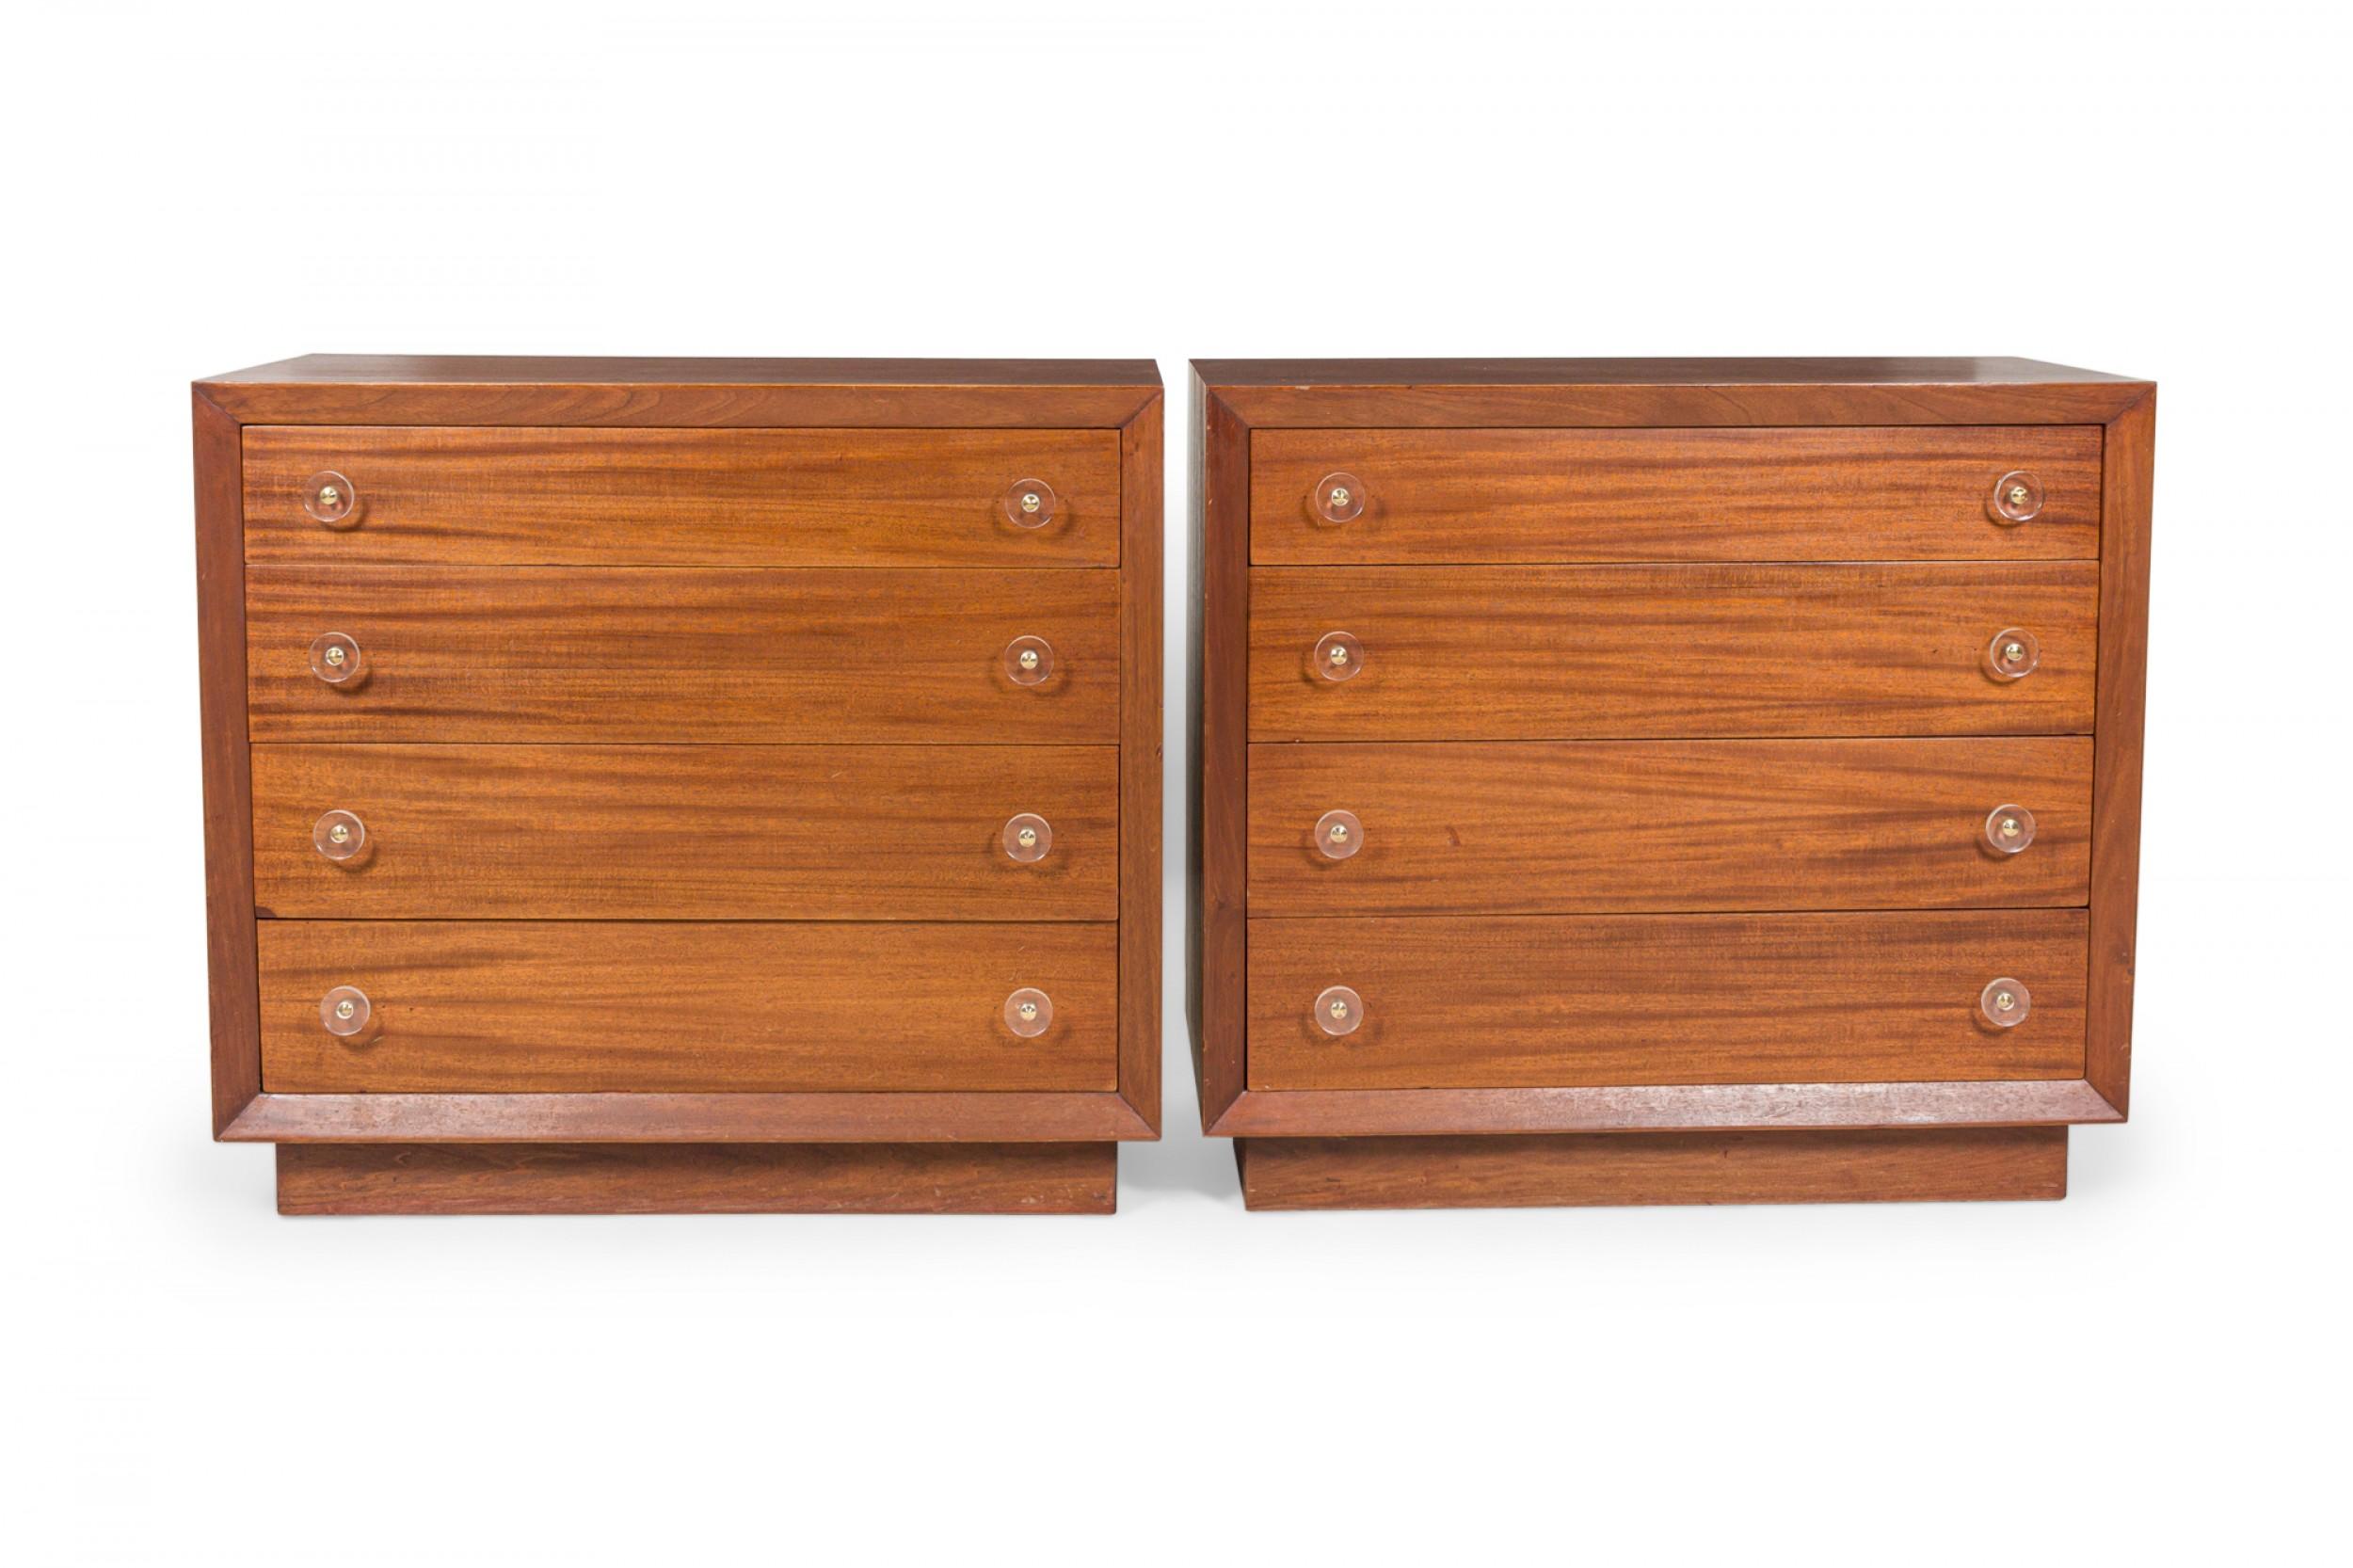 Pair of mid-century ribbon mahogany four-drawer commodes with disk-shaped lucite drawer pulls. (Modern Age)(Priced as Pair).